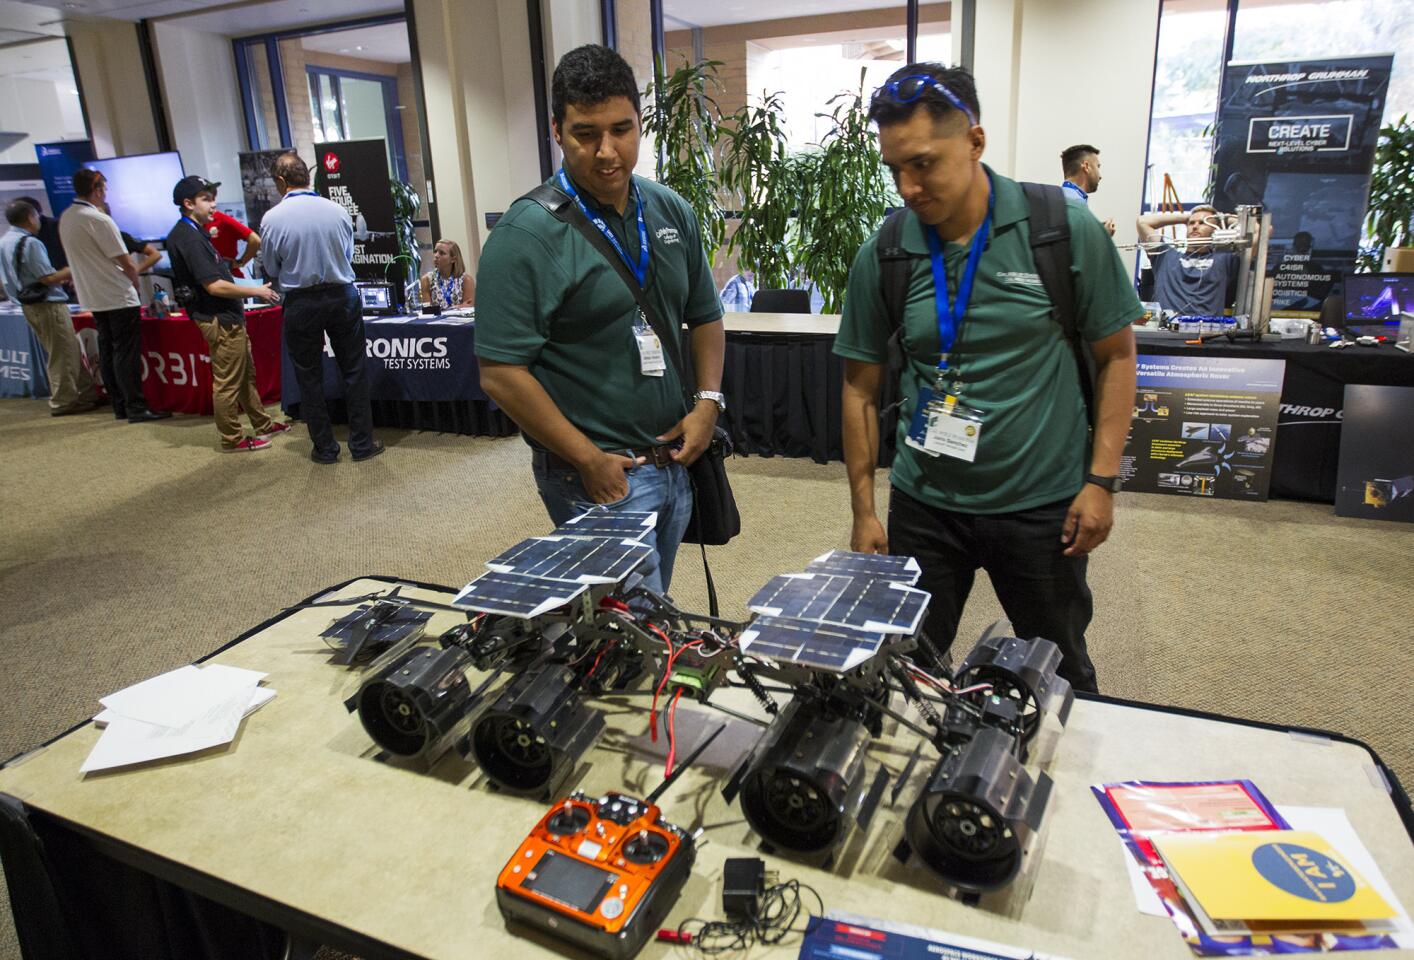 Alfredo Herrera and Jairo Sanchez from Cal Poly Pomona look at a miniature replica of the Mars Rover during an Aerospace Symposium and Expo at UC Irvine on Thursday.